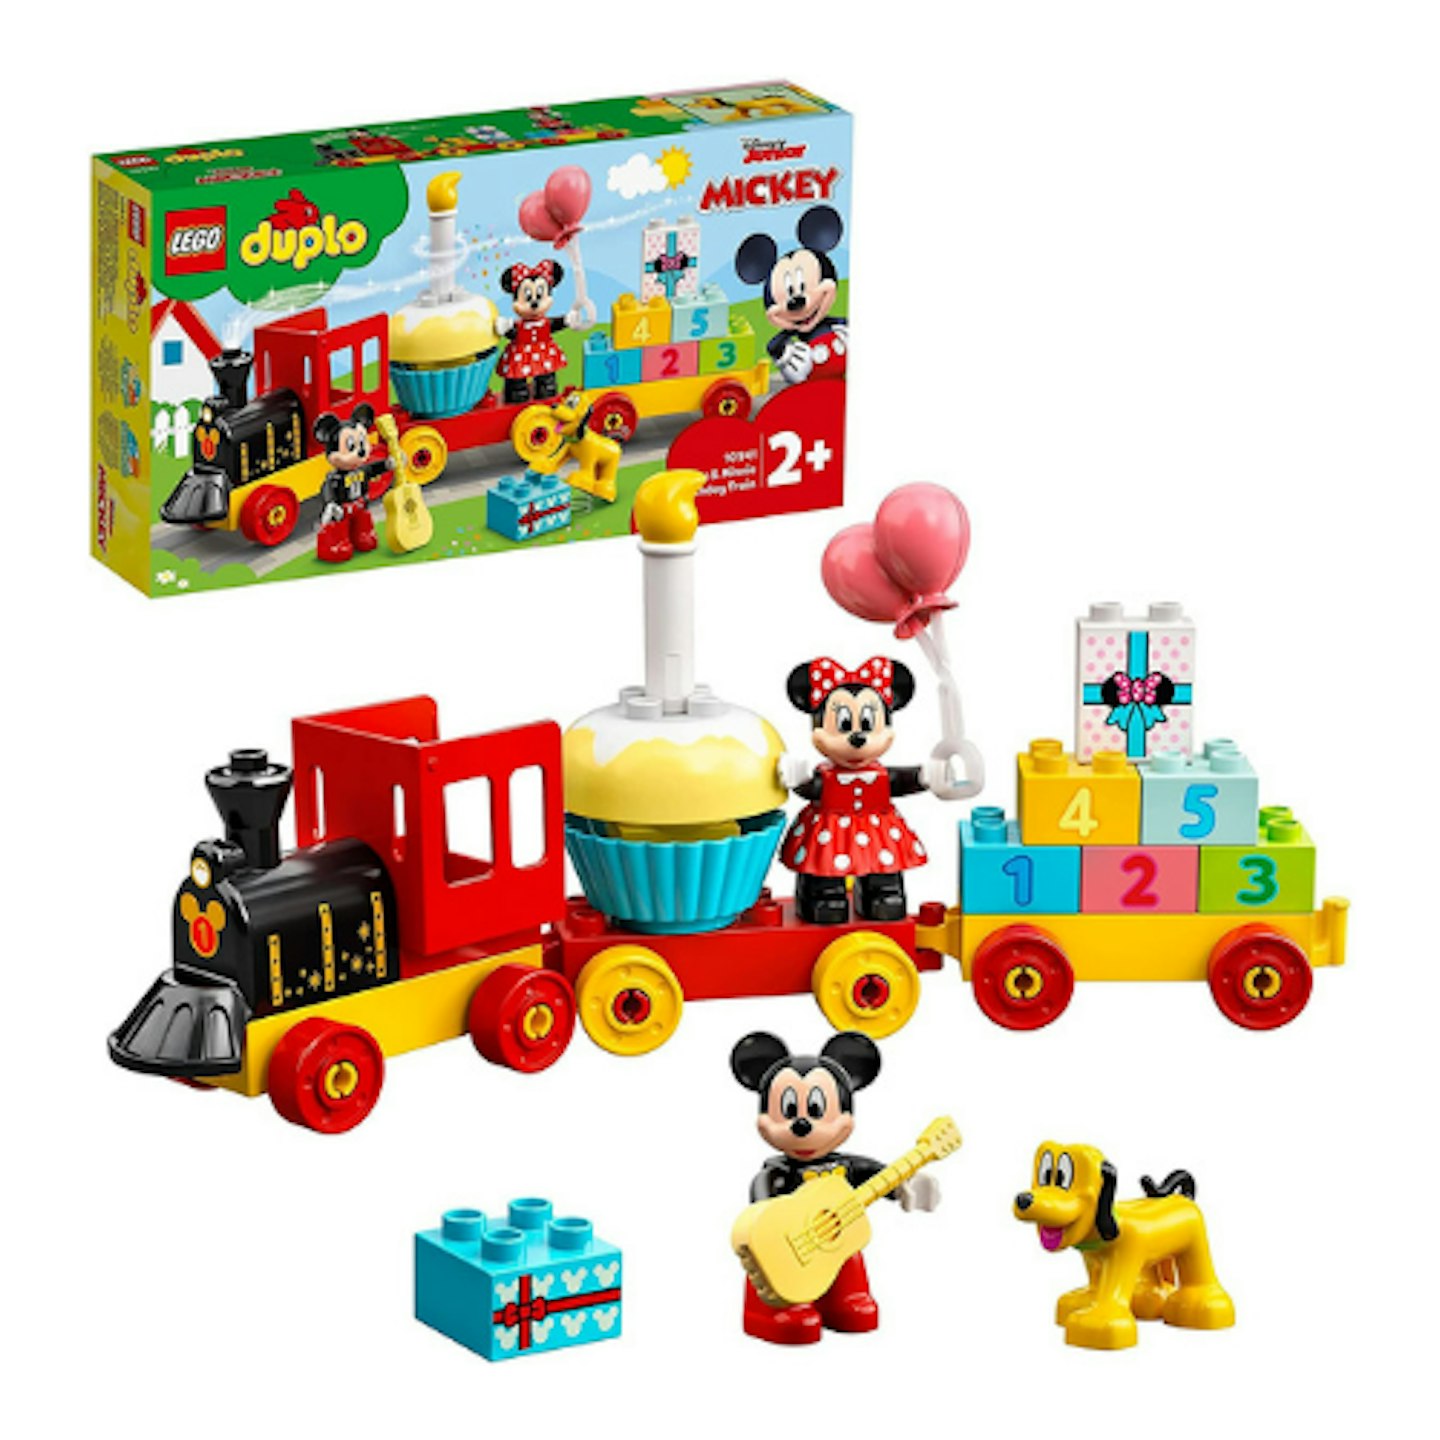 DUPLO Disney Mickey & Minnie Birthday Buildable Train Toy for Toddlers with Cake and Balloons